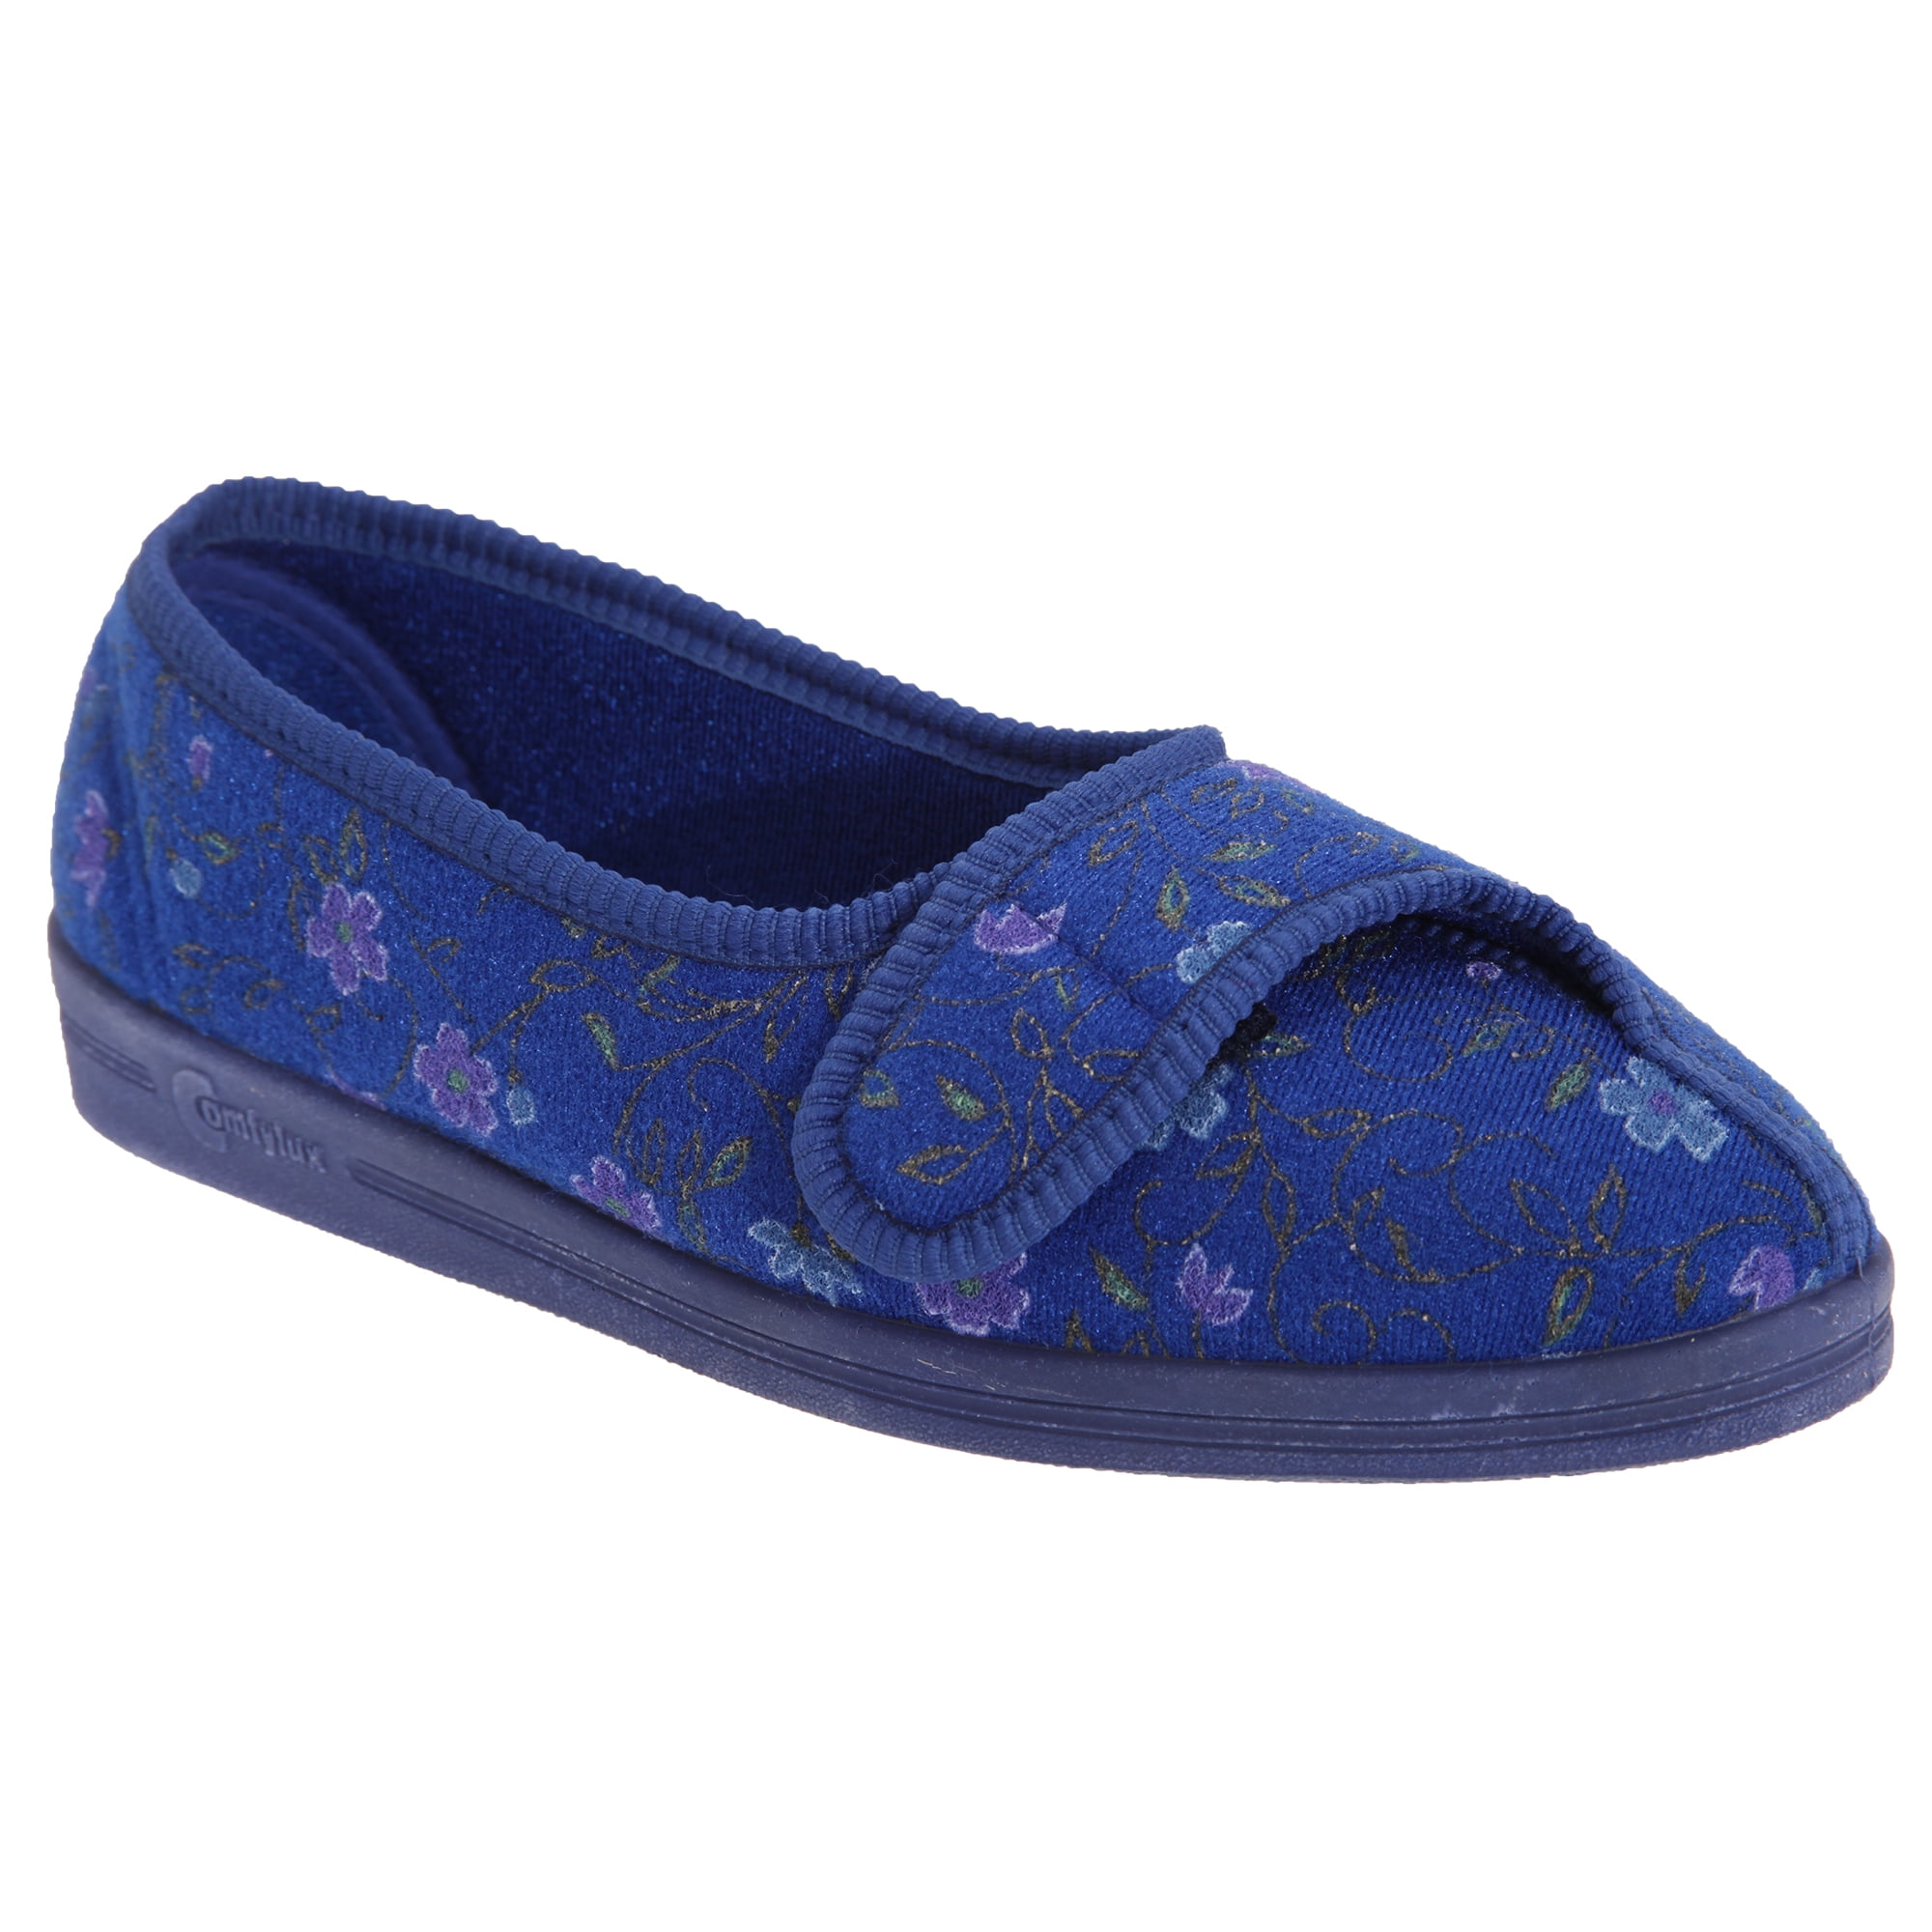 Comfylux STELLA EEEE Fitting Superwide Touch Fastening Slippers 